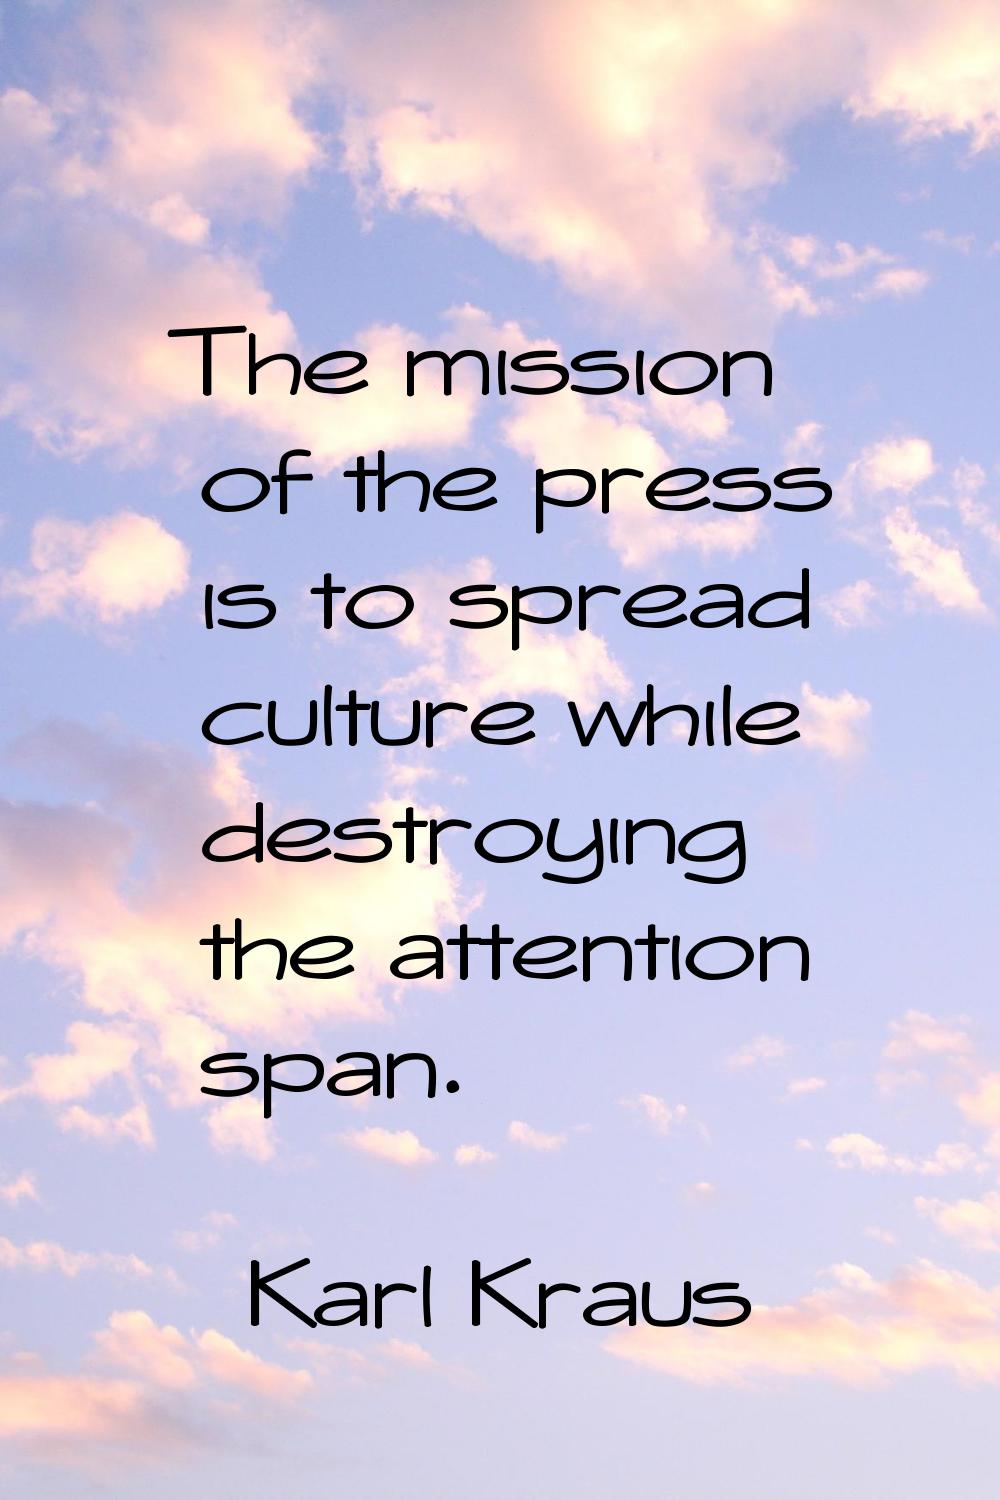 The mission of the press is to spread culture while destroying the attention span.